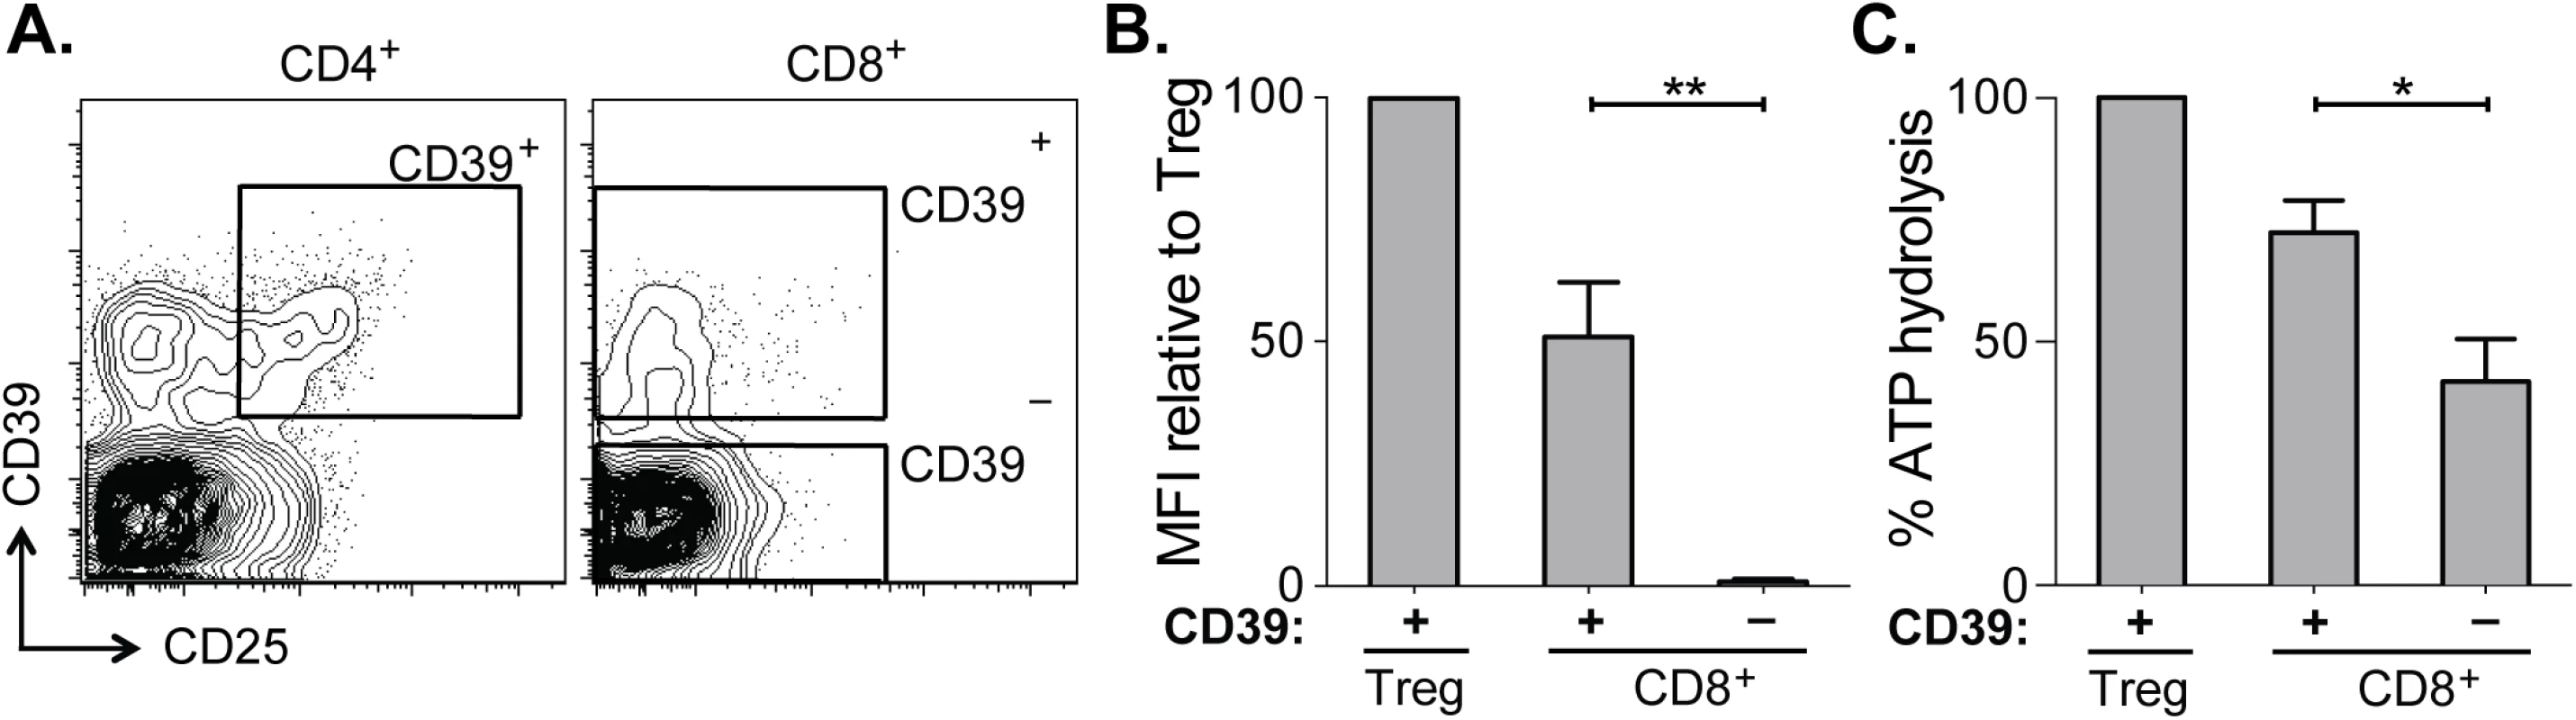 CD39 expressed by CD8<sup>+</sup> T cells in HCV infection is enzymatically active.